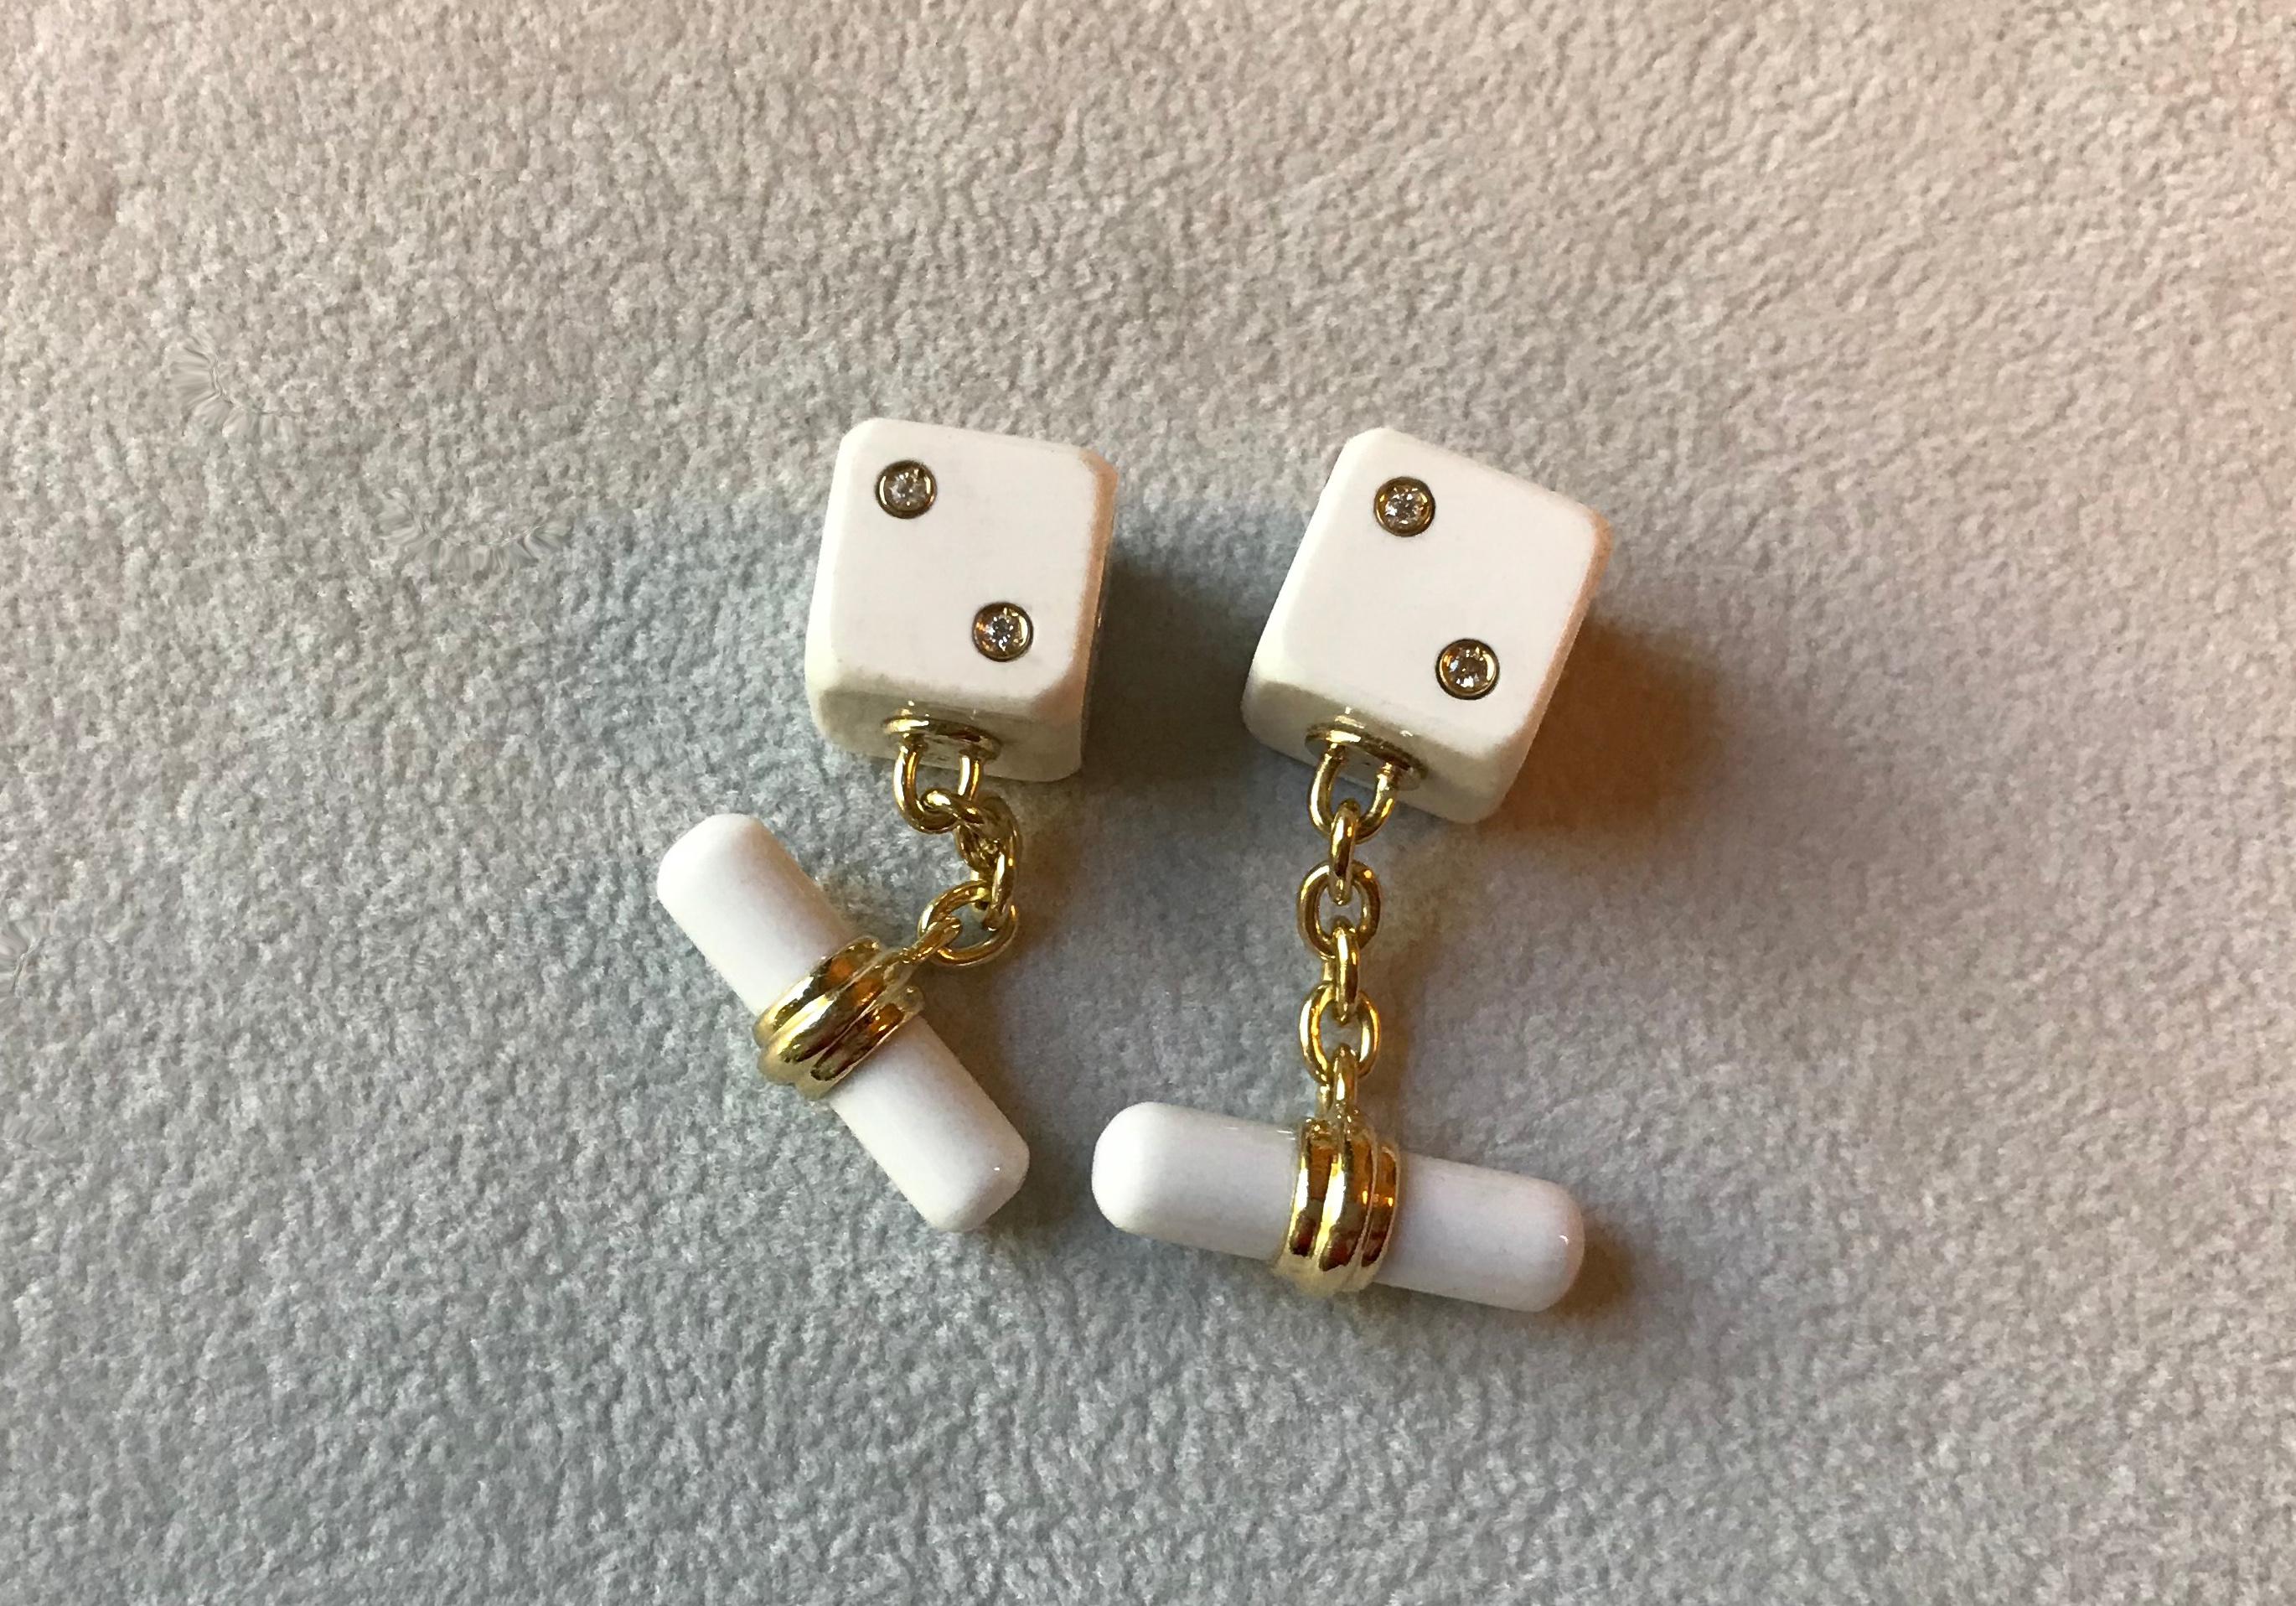 This sophisticated pair of cufflinks is entirely made of white agate and it features a simple, cylindrical toggle attached to the front with an 18k yellow gold post. 
The front face is shaped as a cube with its striking white surface highlighted by